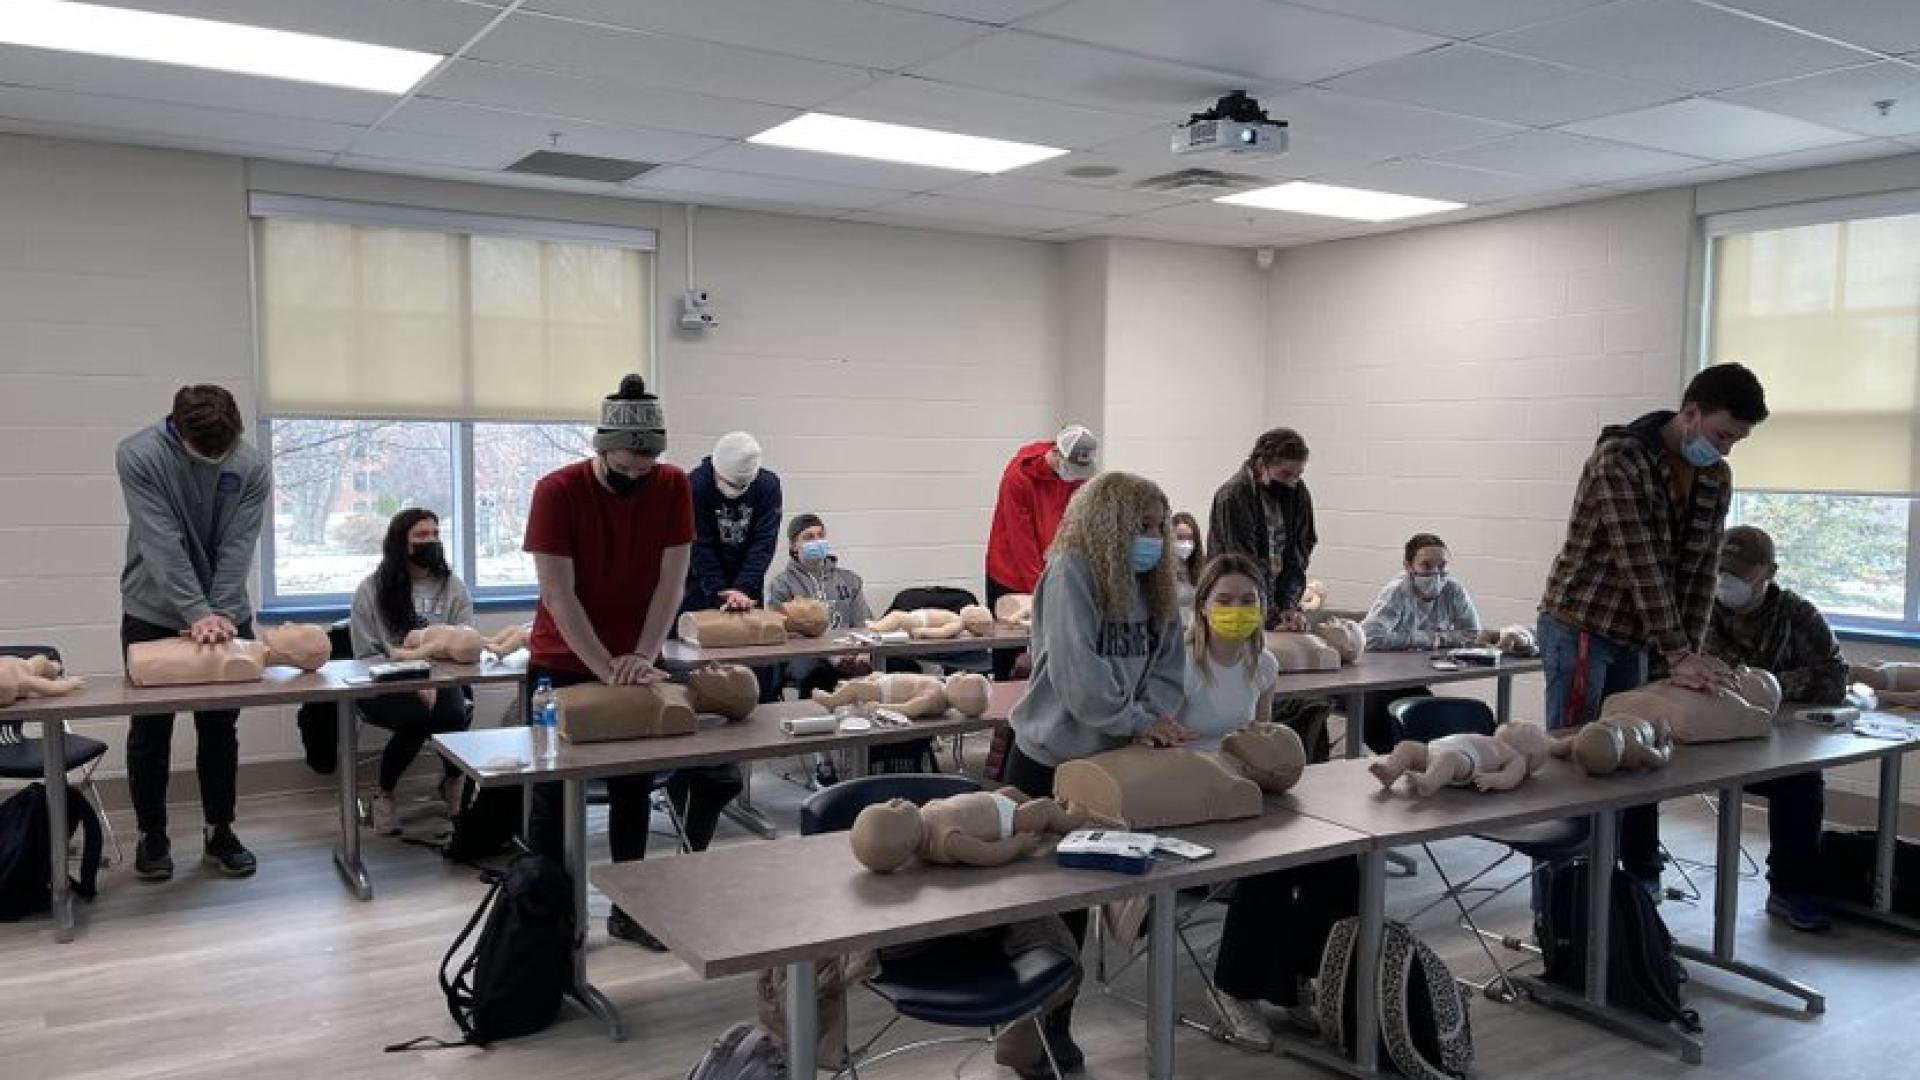 Students practice CPR on dummies